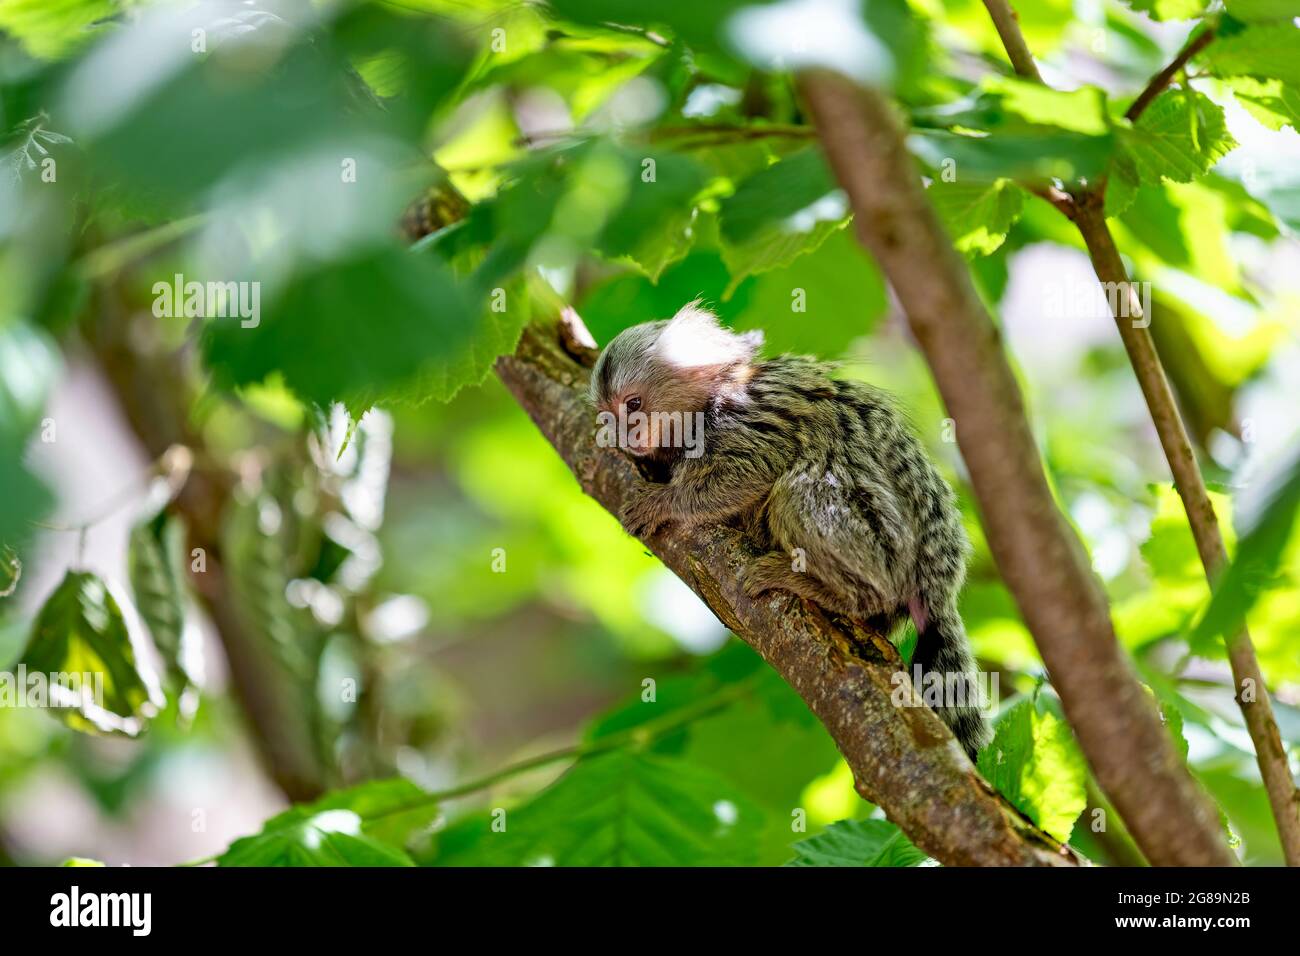 Longleat, Wiltshire, UK - July 17 2014: A Common Marmoset ( Callithrix jacchus) at Longleat Safari and Adventure Park in Wiltshire, England, UK Stock Photo